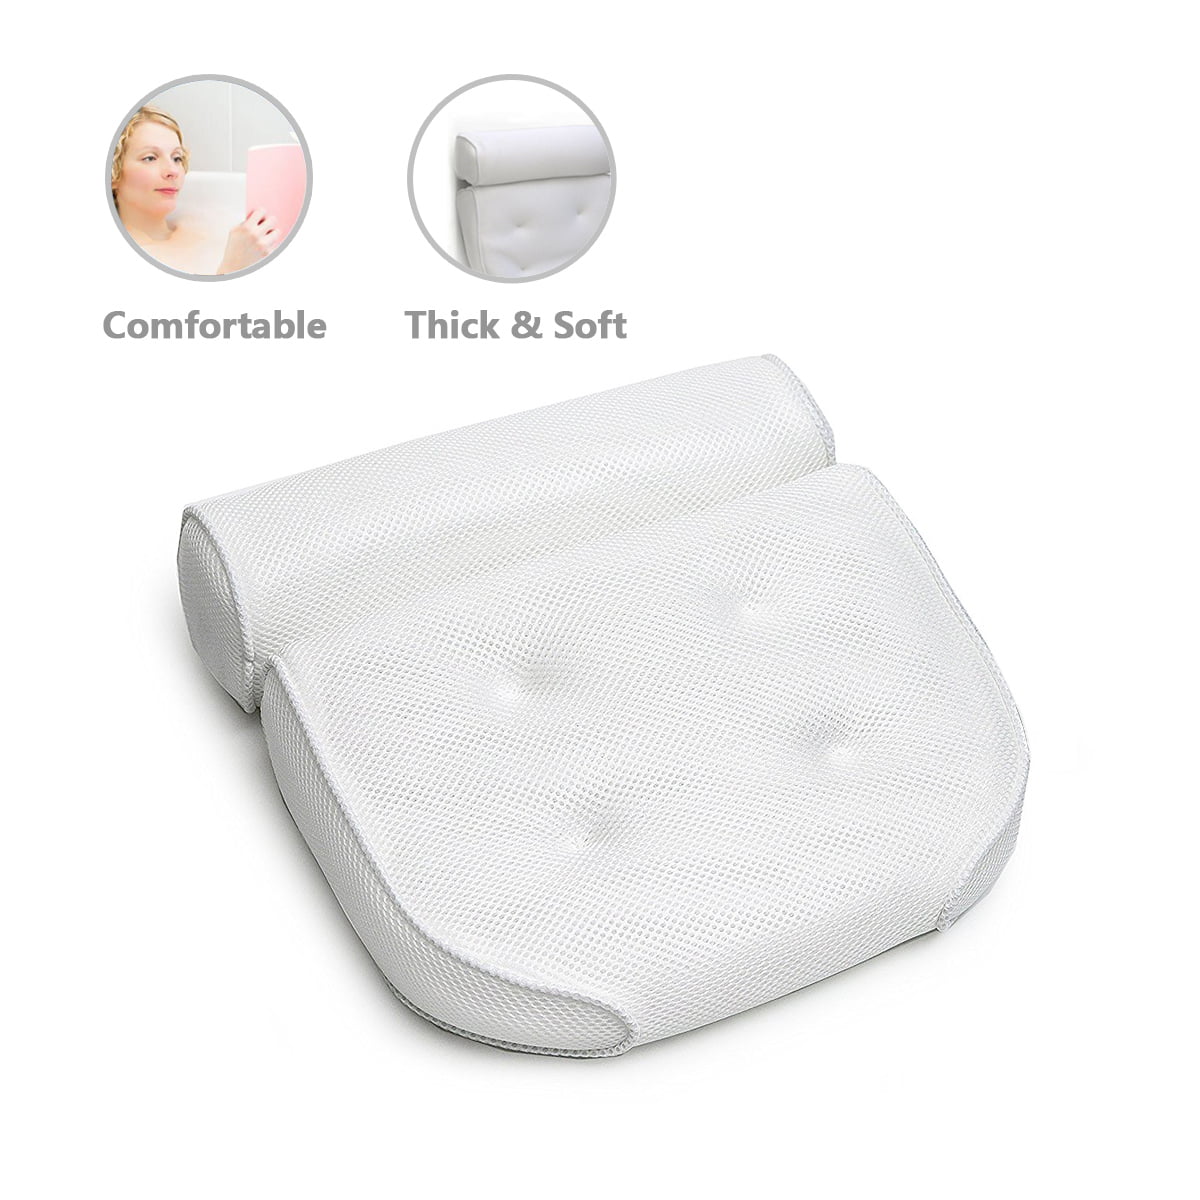  SHUING Adult Bath Pillow Bathtub Neck and Back Support